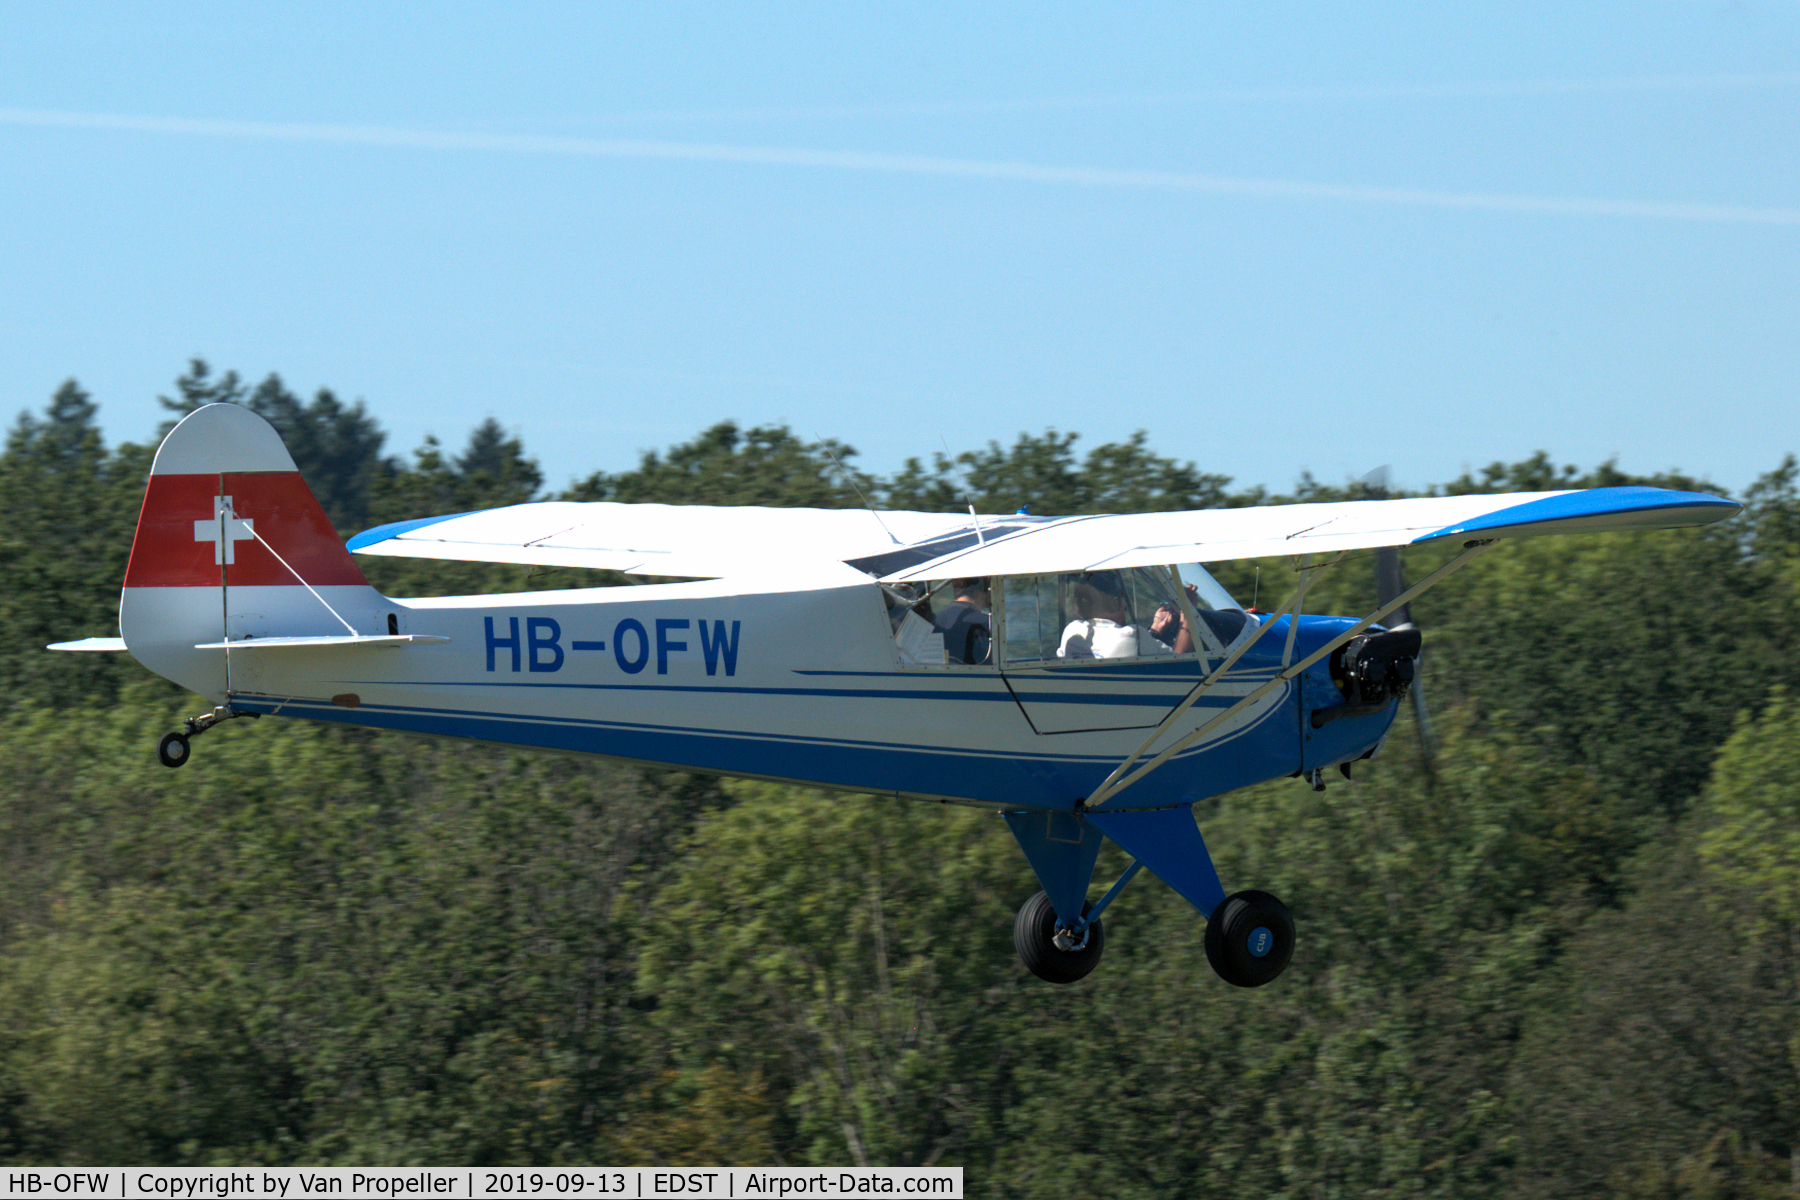 HB-OFW, 1944 Piper L-4H Grasshopper (J3C-65D) C/N 12273, Piper L-4H Grasshopper about to land at Hahnweide airfield, Germany. OTT 2019